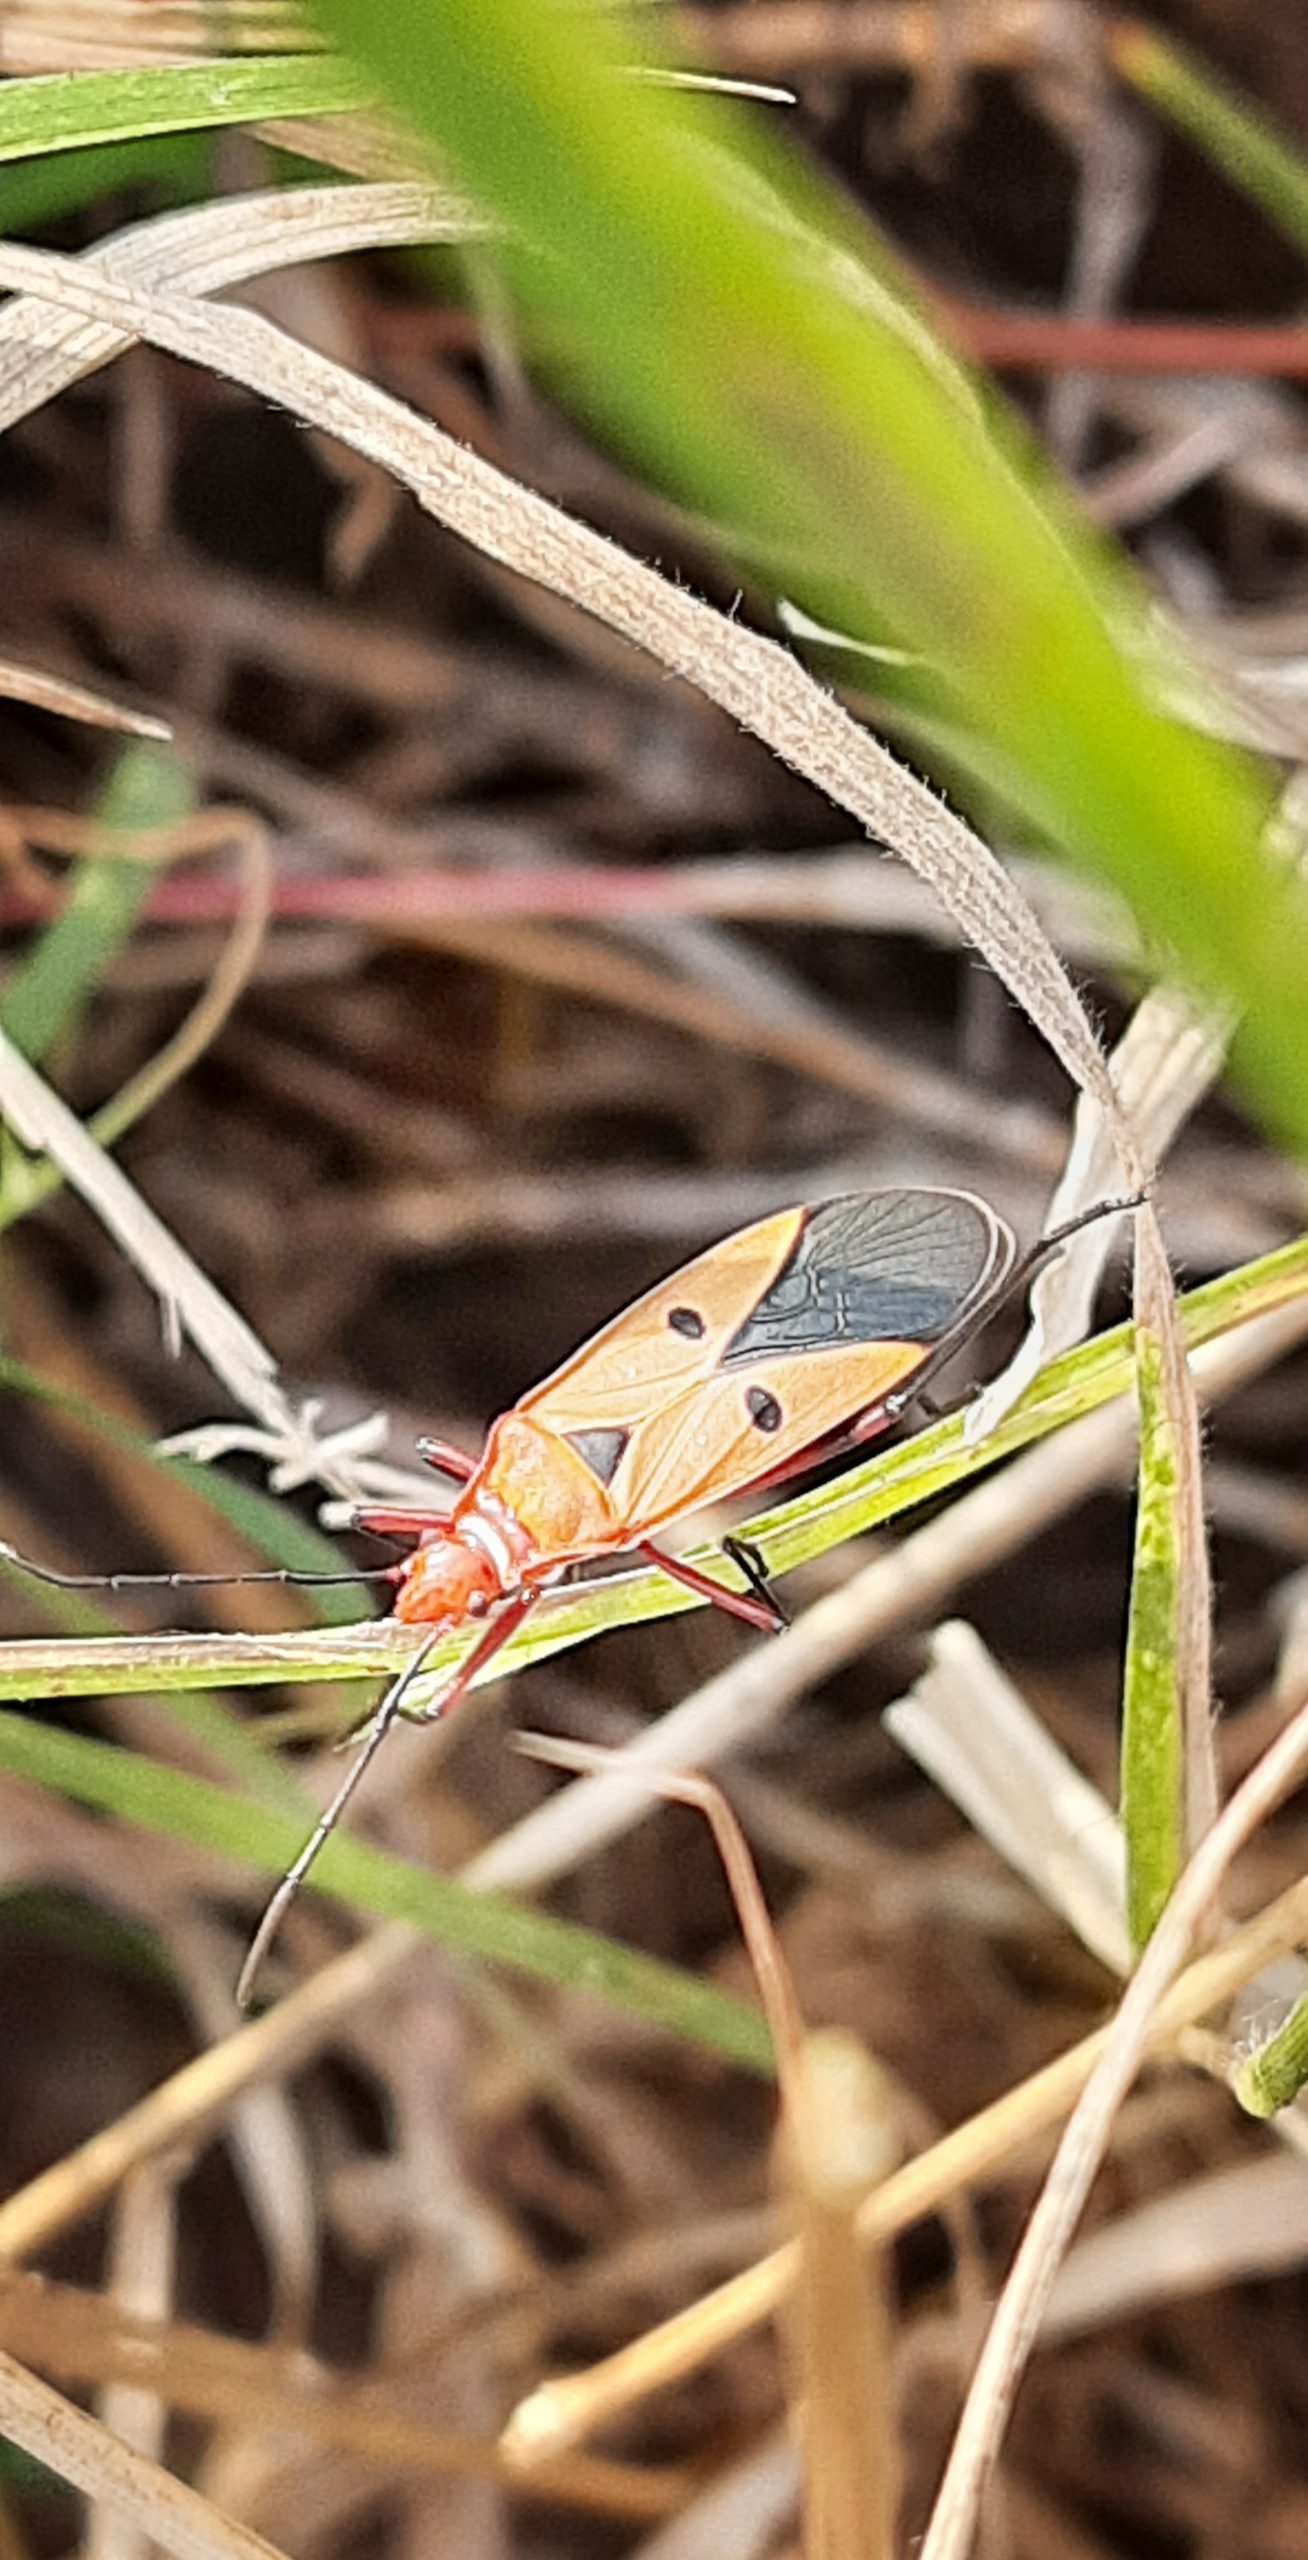 Insect on grass